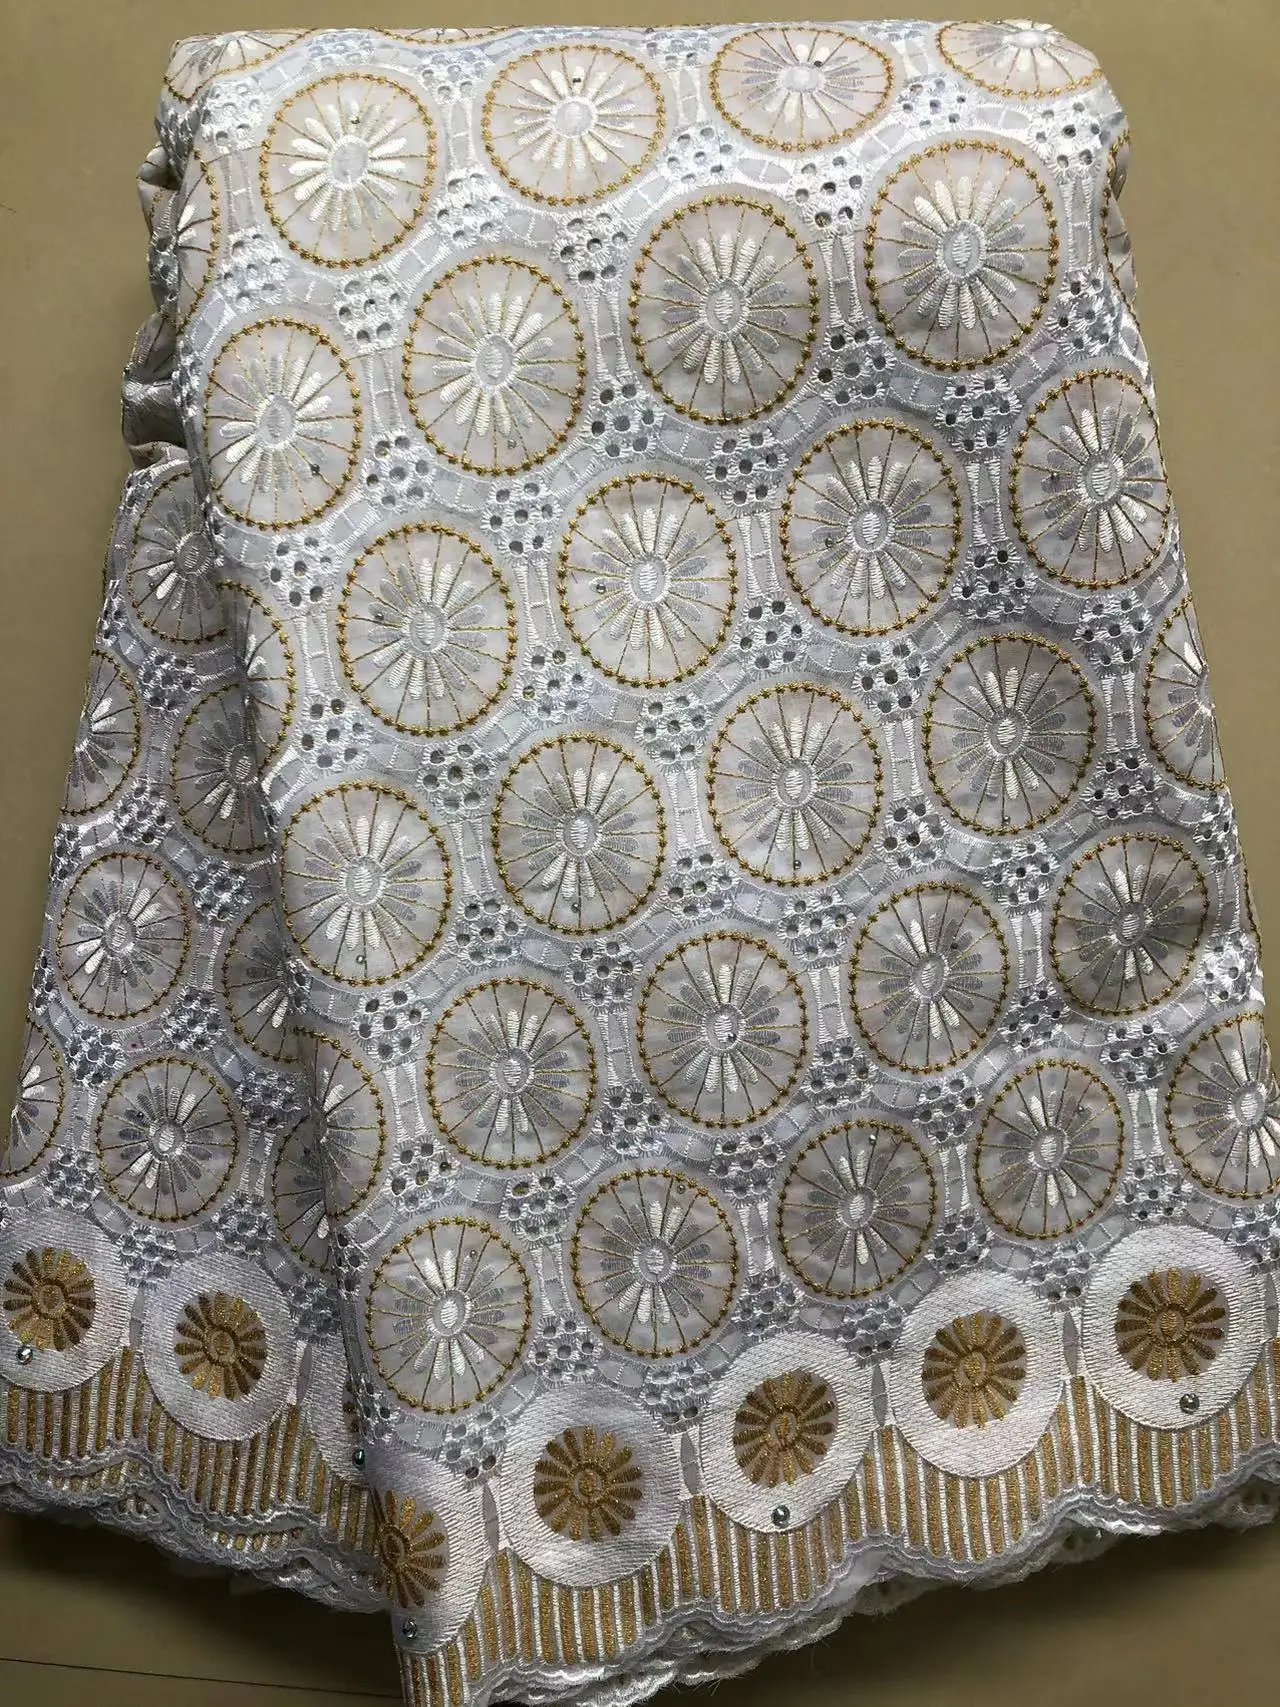 African Cotton Lace Fabric 2023 High Quality Swiss Voile Lace In Switzerland With Stones Nigerian Lace Fabrics For Wedding Dress 5 yards pcs swiss voile lace in switzerland high quality embroidery stones dry african lace fabric for wedding party dress 2095